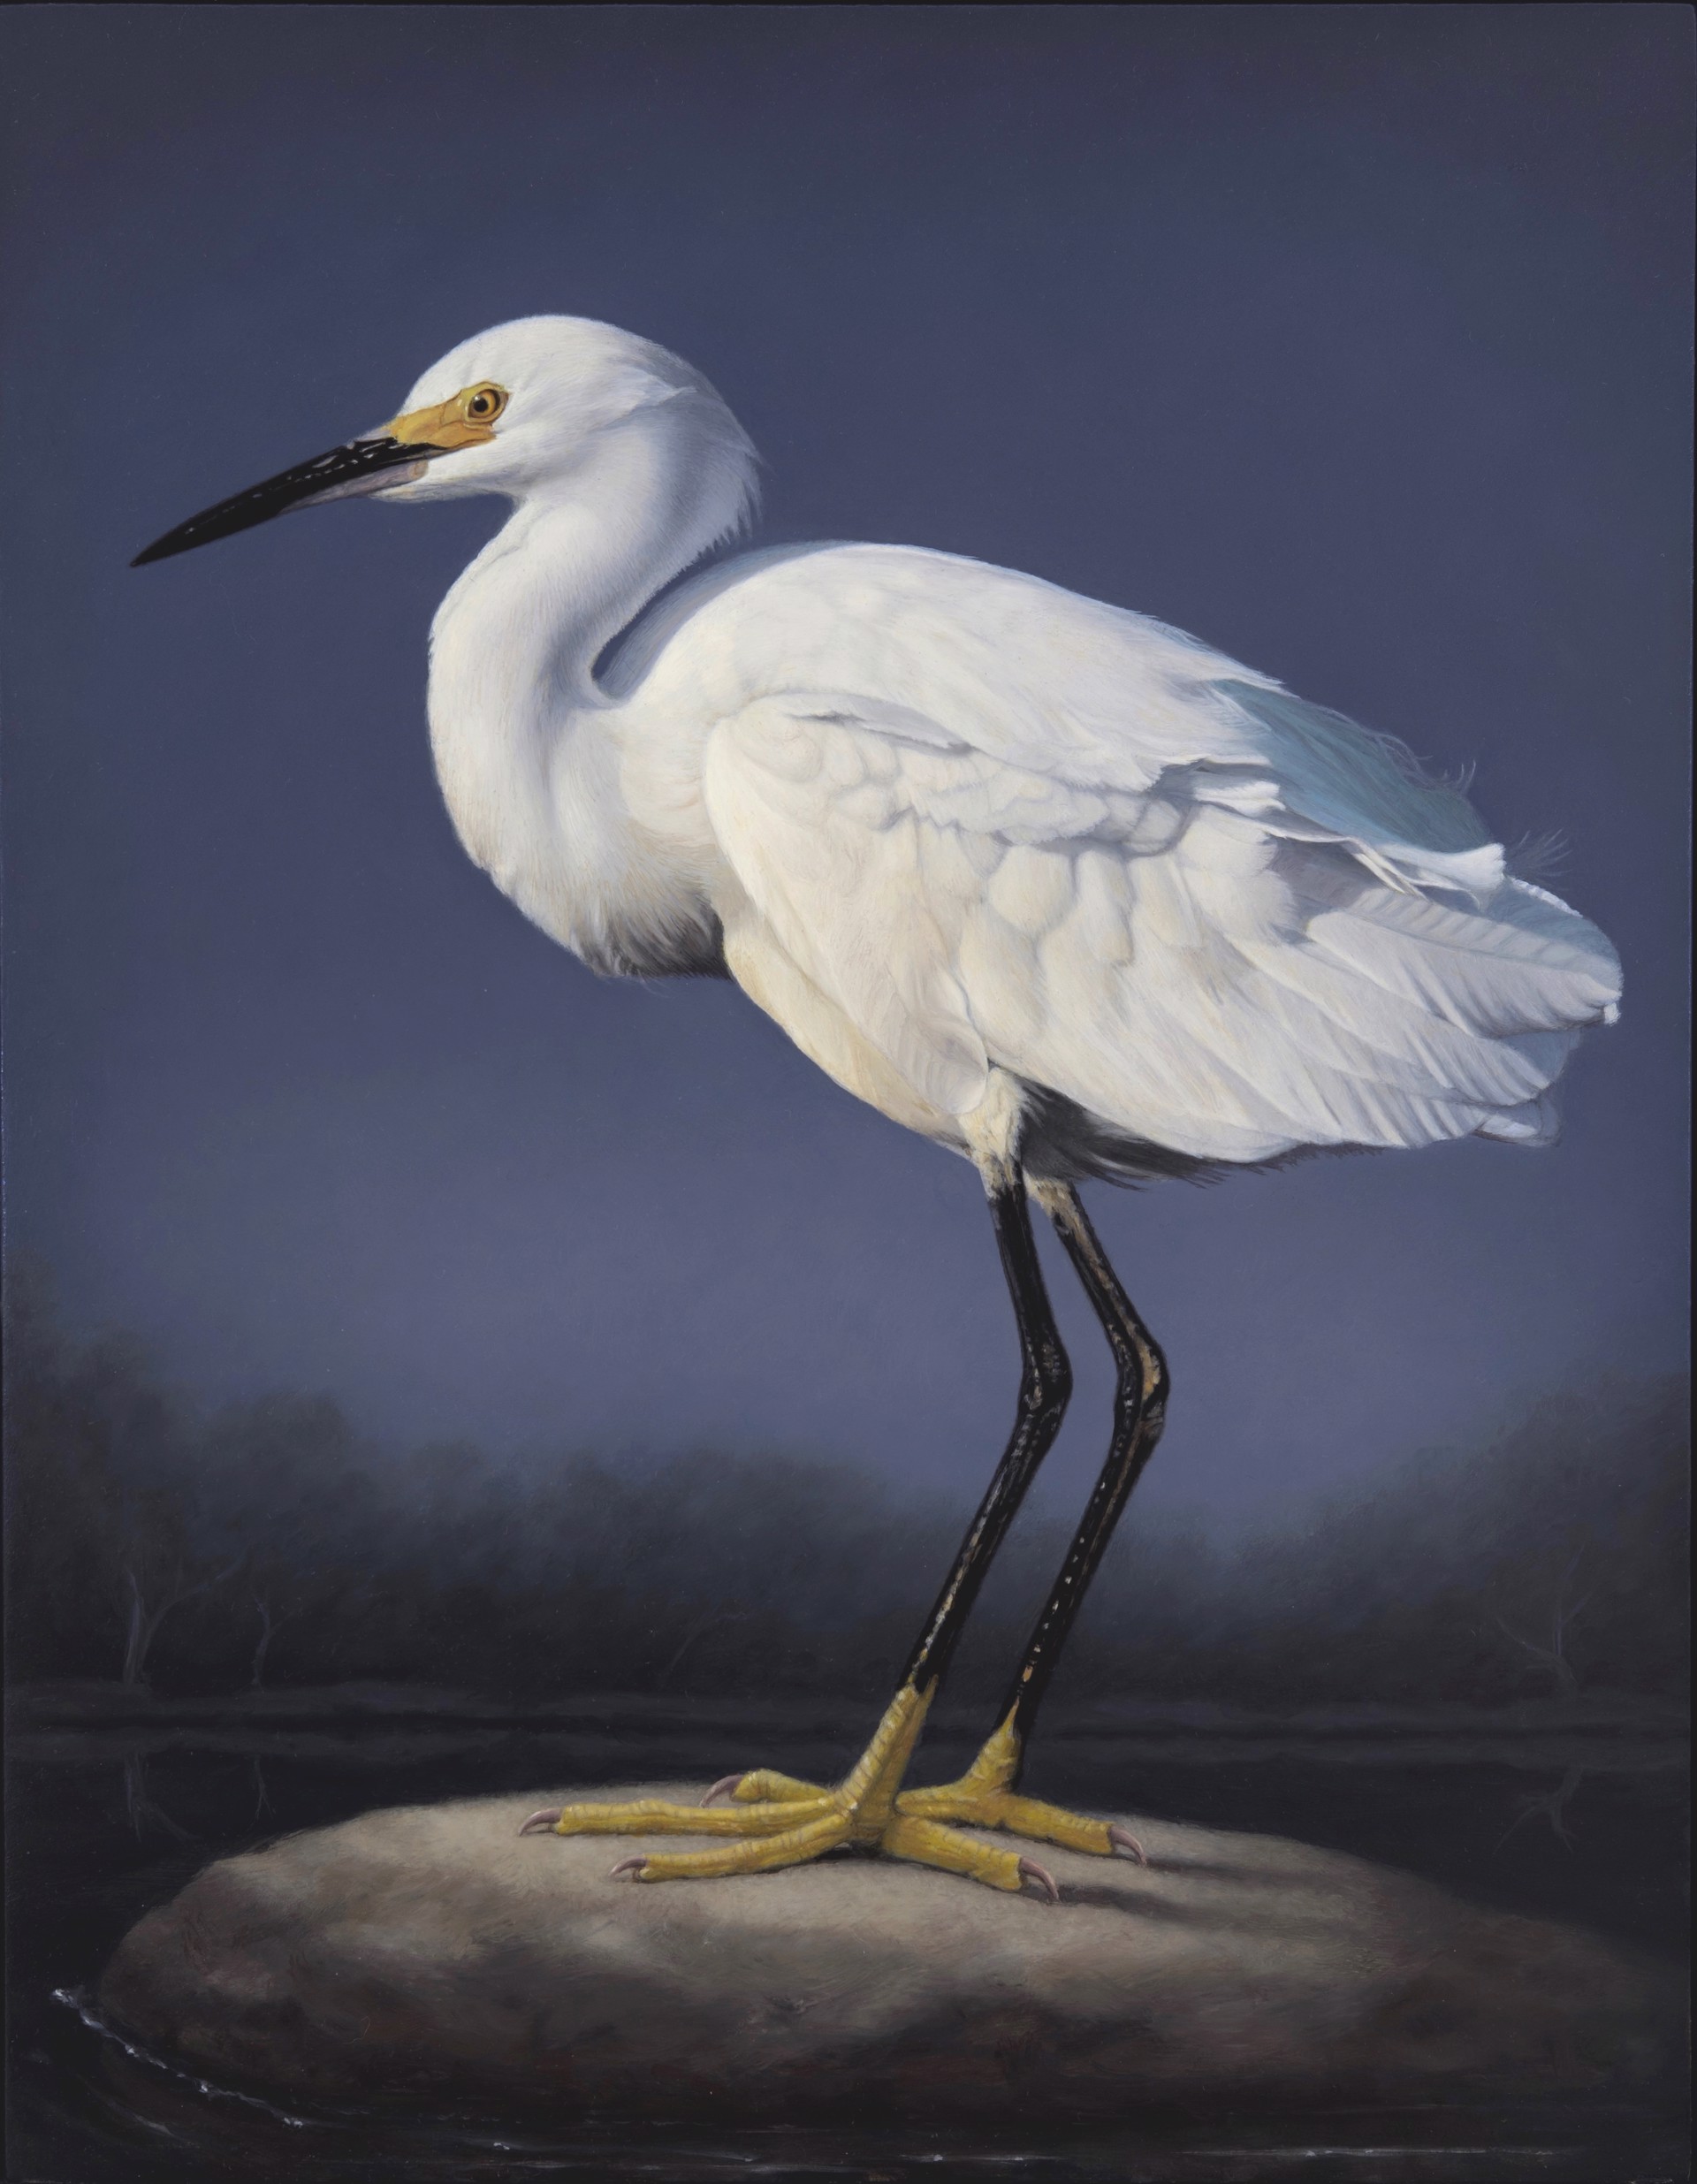 Snowy Egret by Susan McDonnell